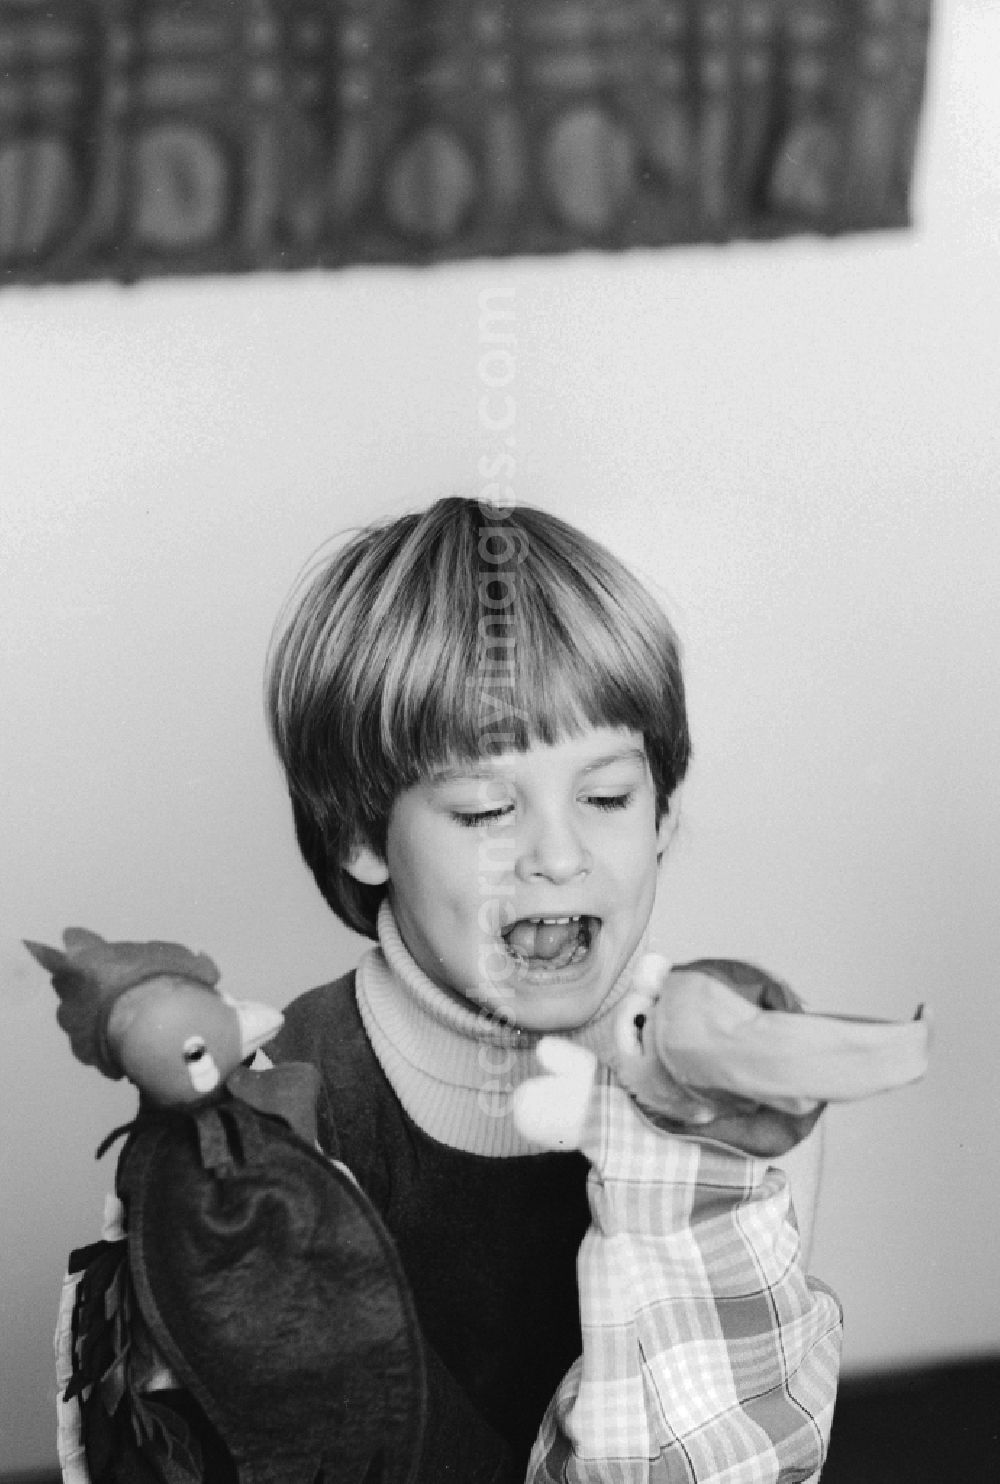 Berlin: A child playing with hand puppets in Berlin, the former capital of the GDR, the German Democratic Republic